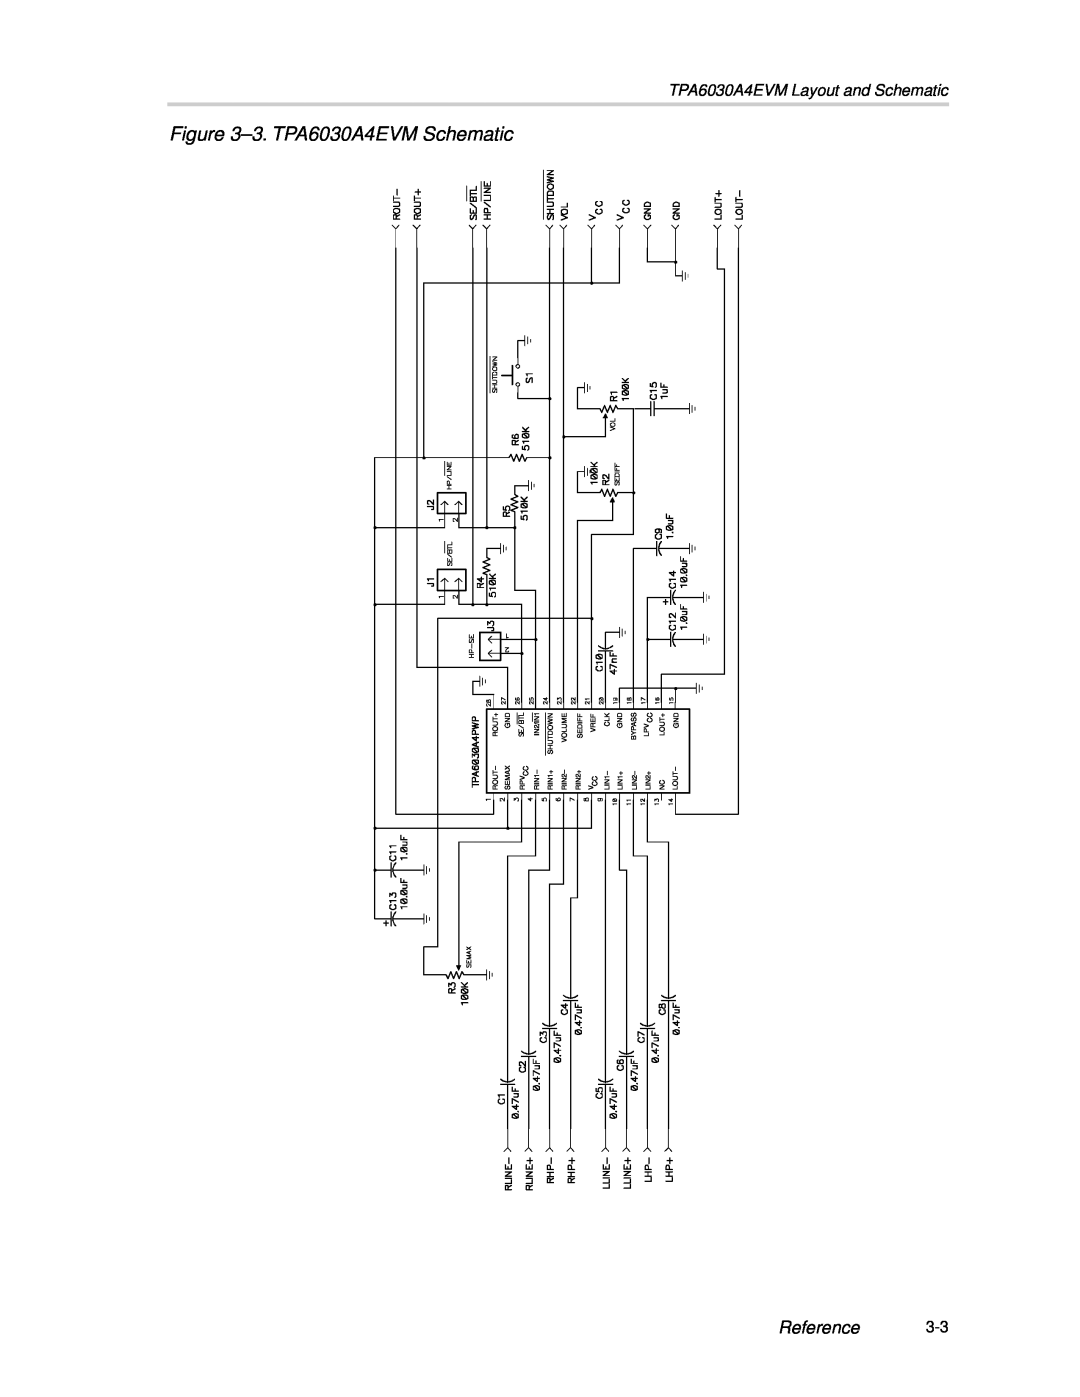 Texas Instruments manual 3.TPA6030A4EVM Schematic, Reference, TPA6030A4EVM Layout and Schematic 